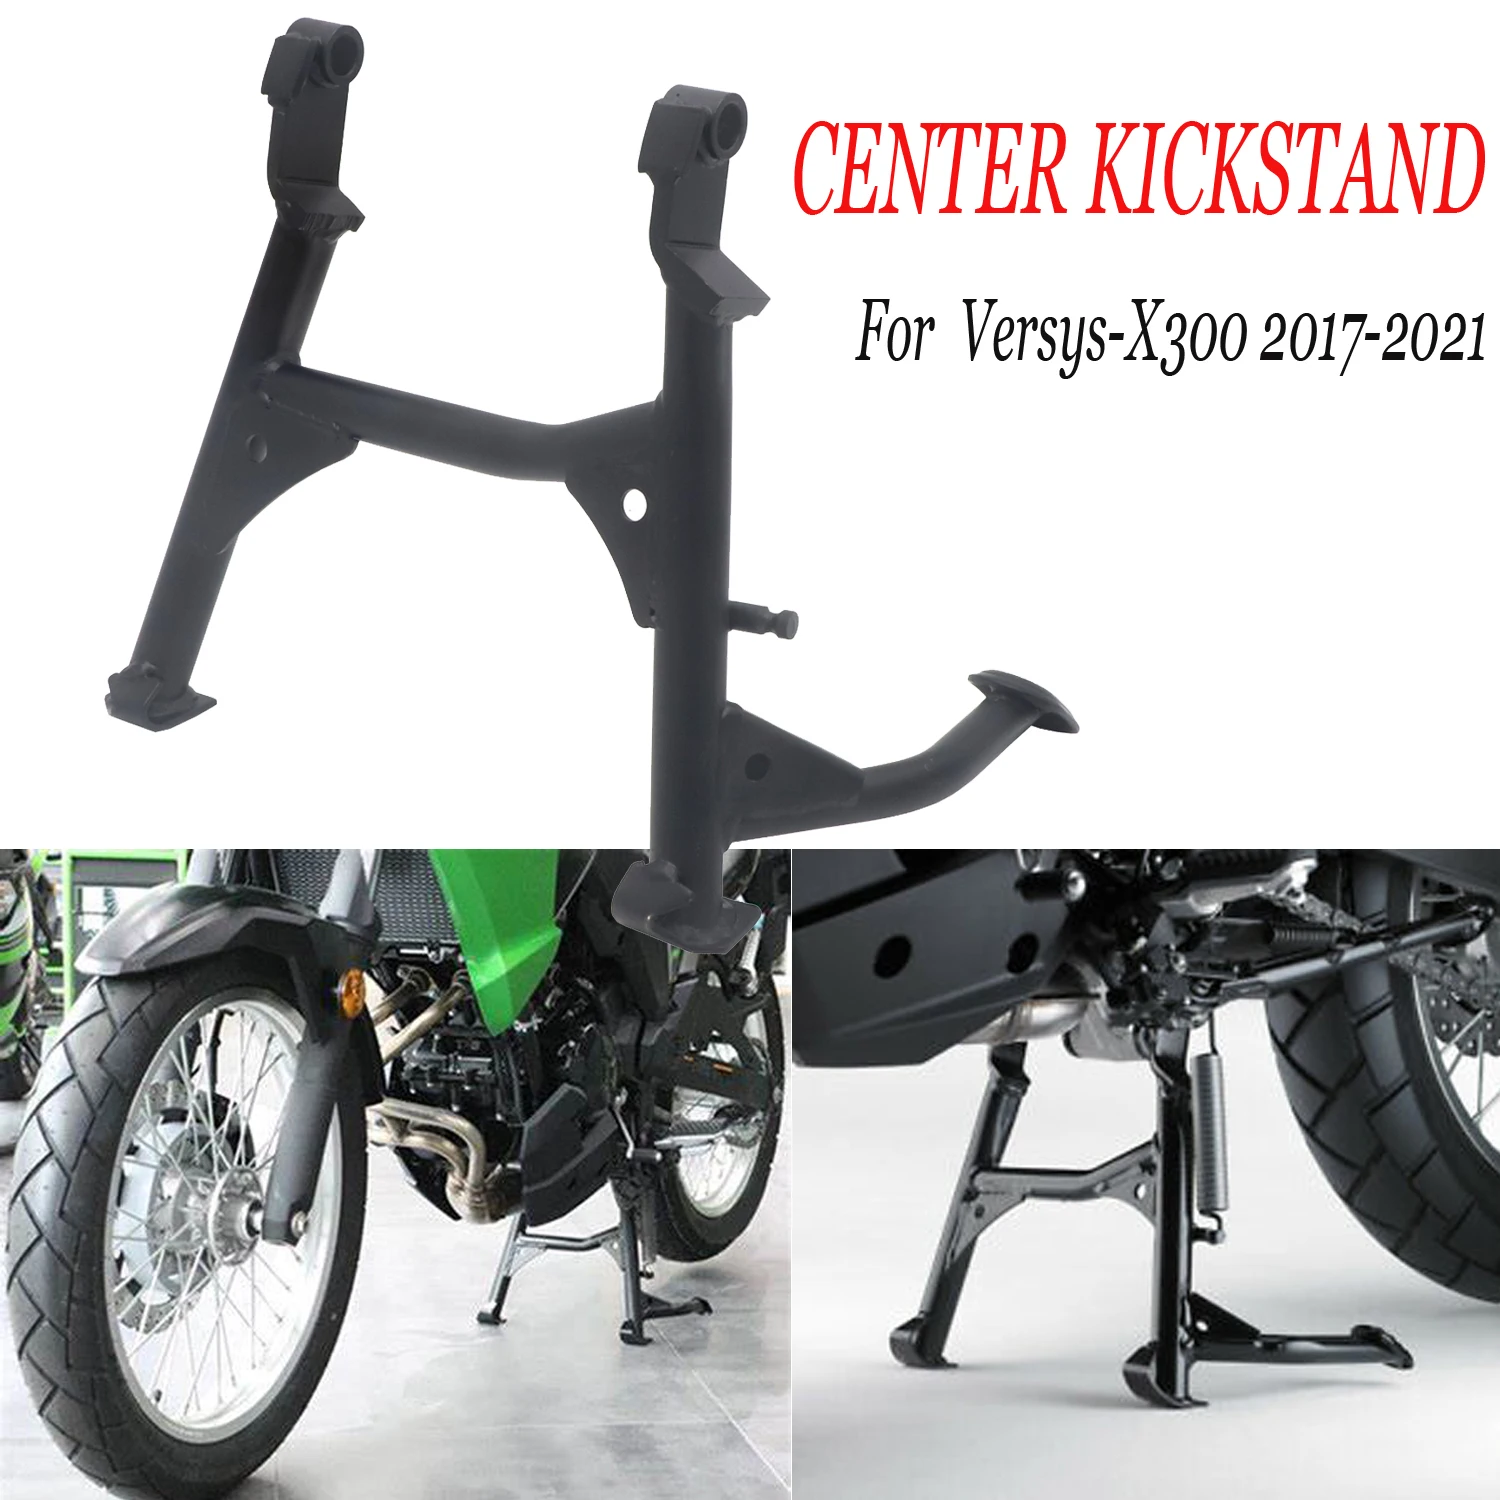 

For Kawasaki Versys X300 Versys-X 300 2017-2021 Centerstand Center Kickstand Foot Side Stand Parking Support X-300 Accesories